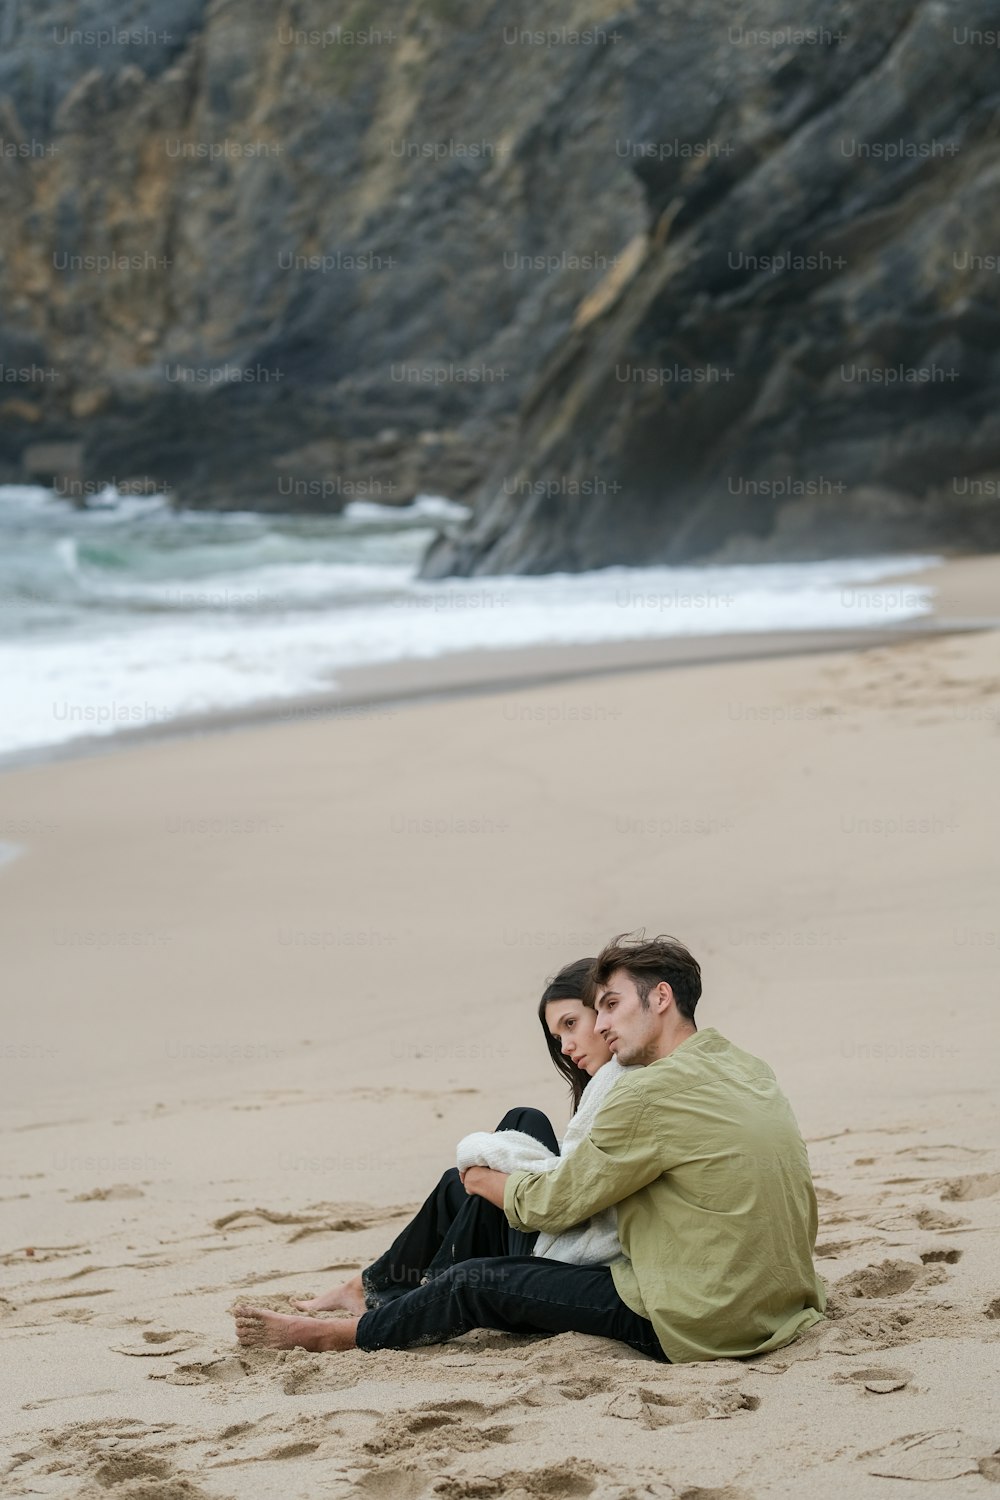 a man and woman sitting on a beach next to the ocean